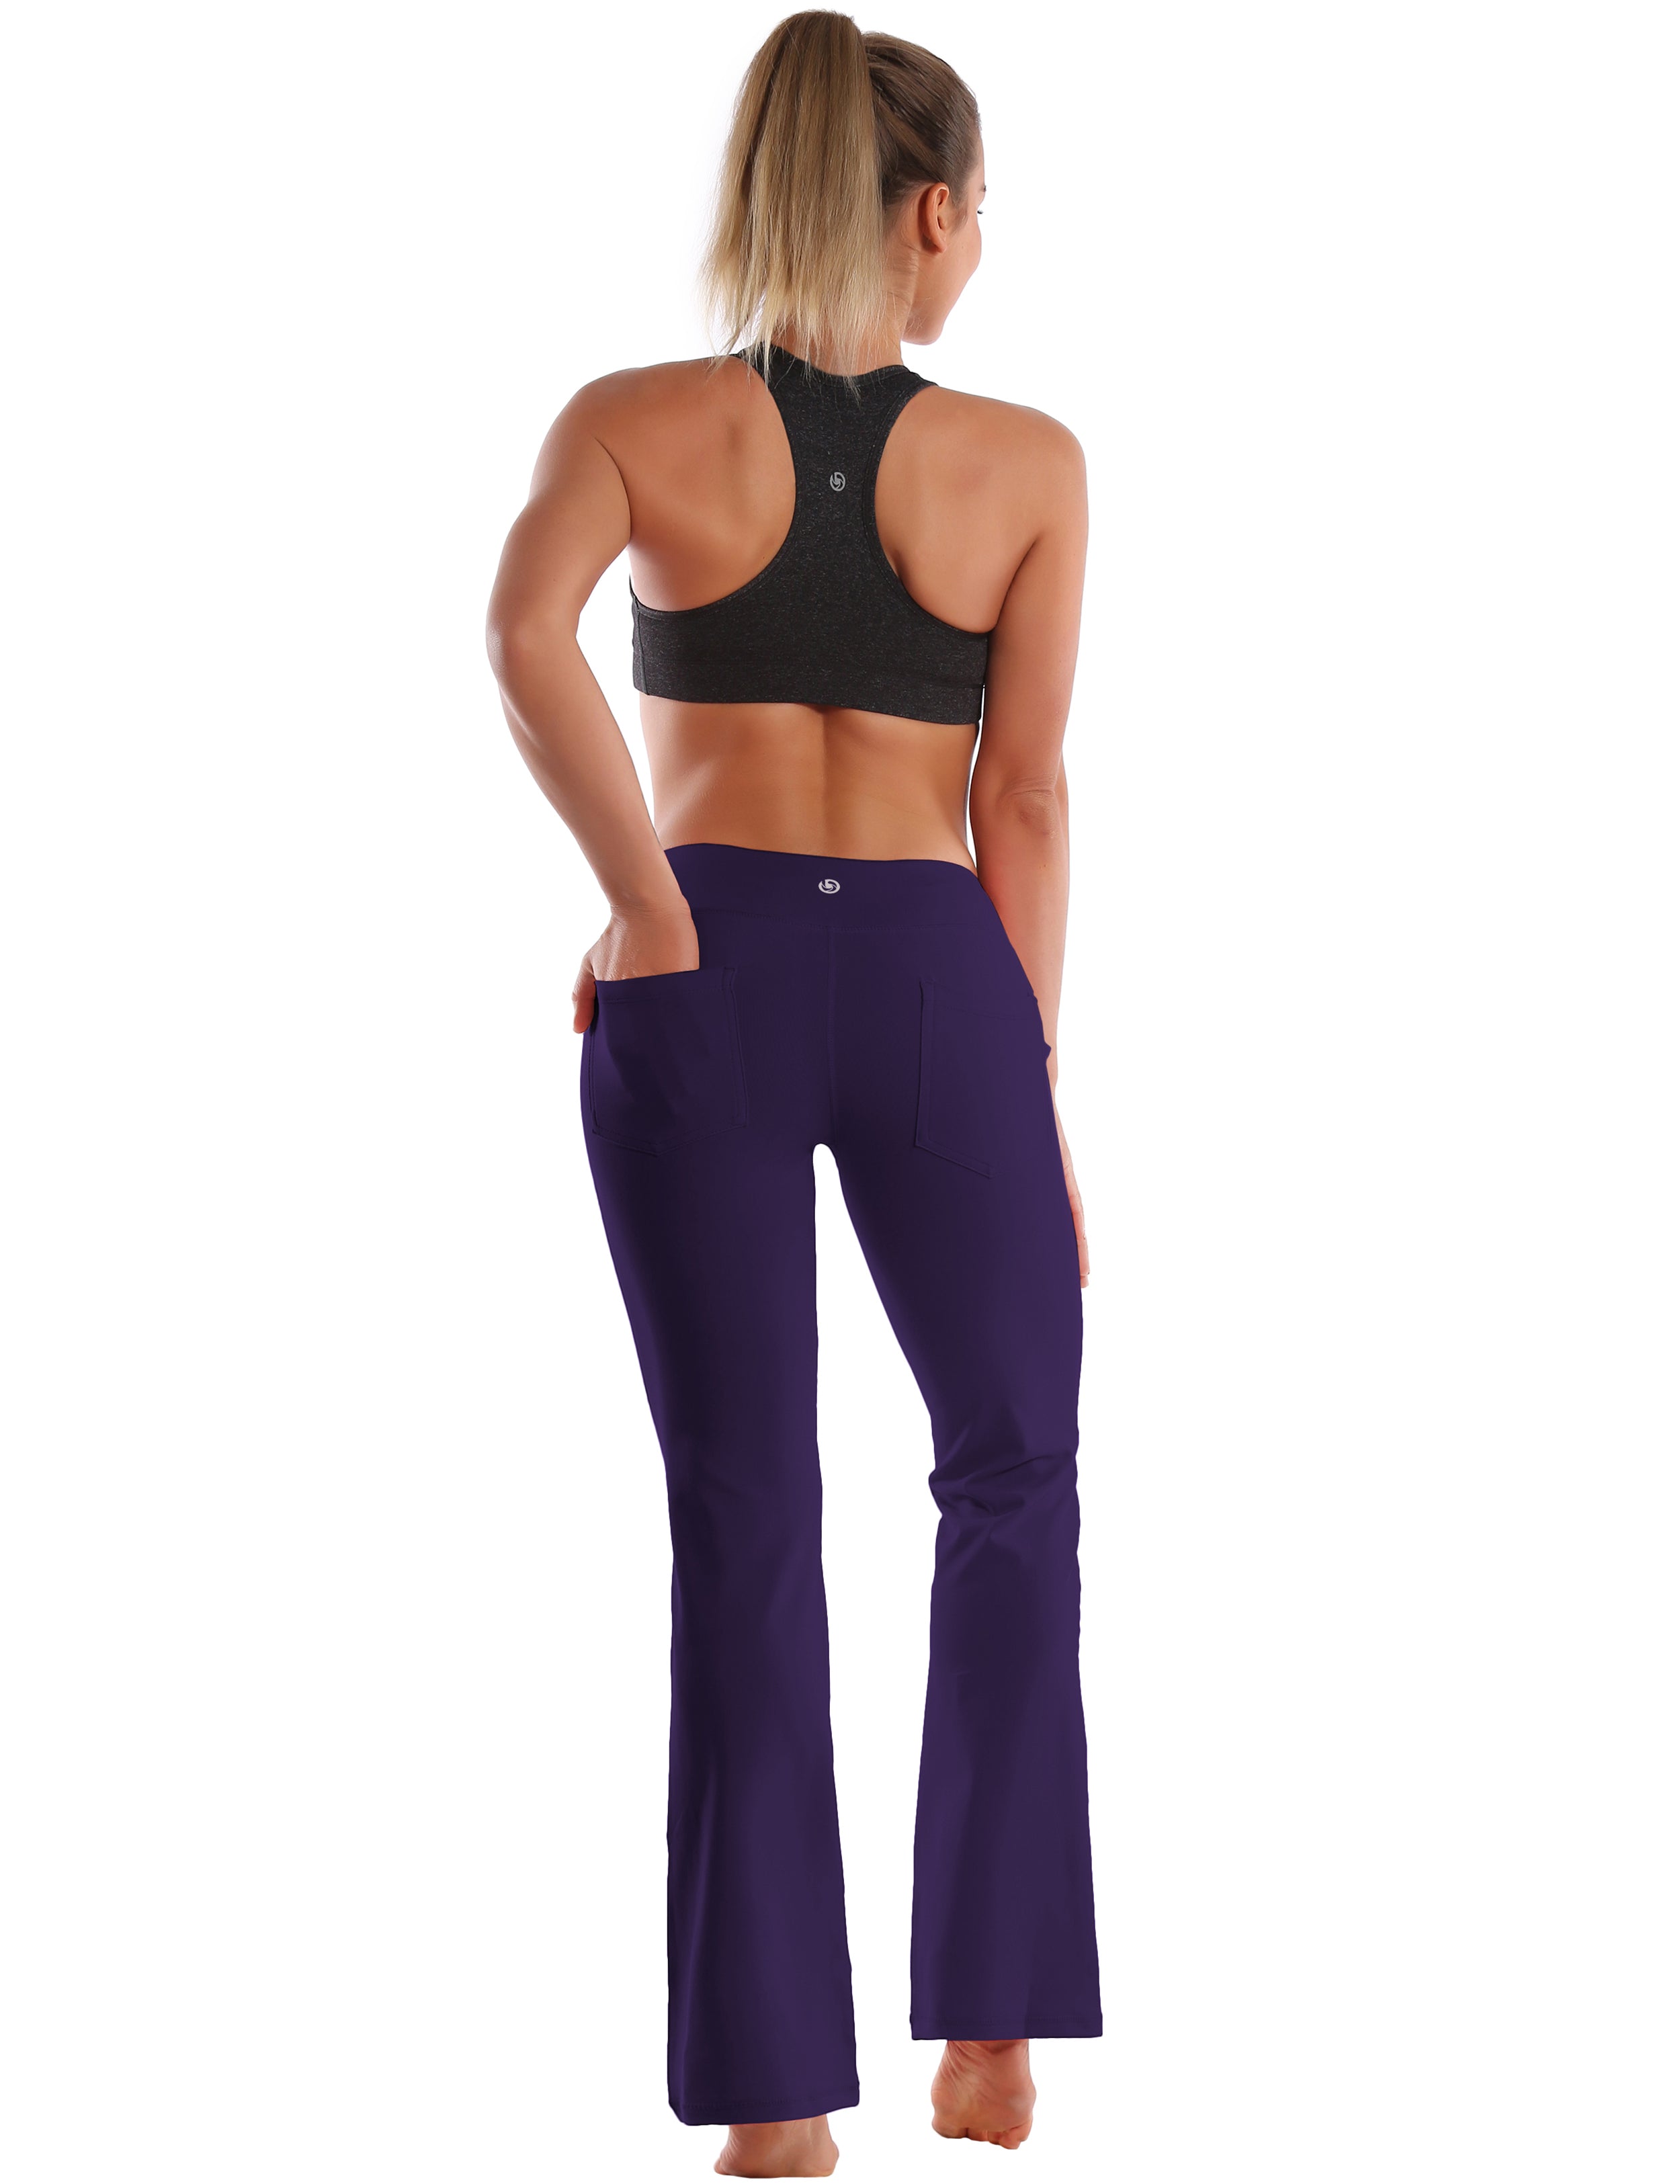 Back Pockets Bootcut Leggings darkpurple 87%Nylon/13%Spandex Fabric doesn't attract lint easily 4-way stretch No see-through Moisture-wicking Inner pocket Four lengths